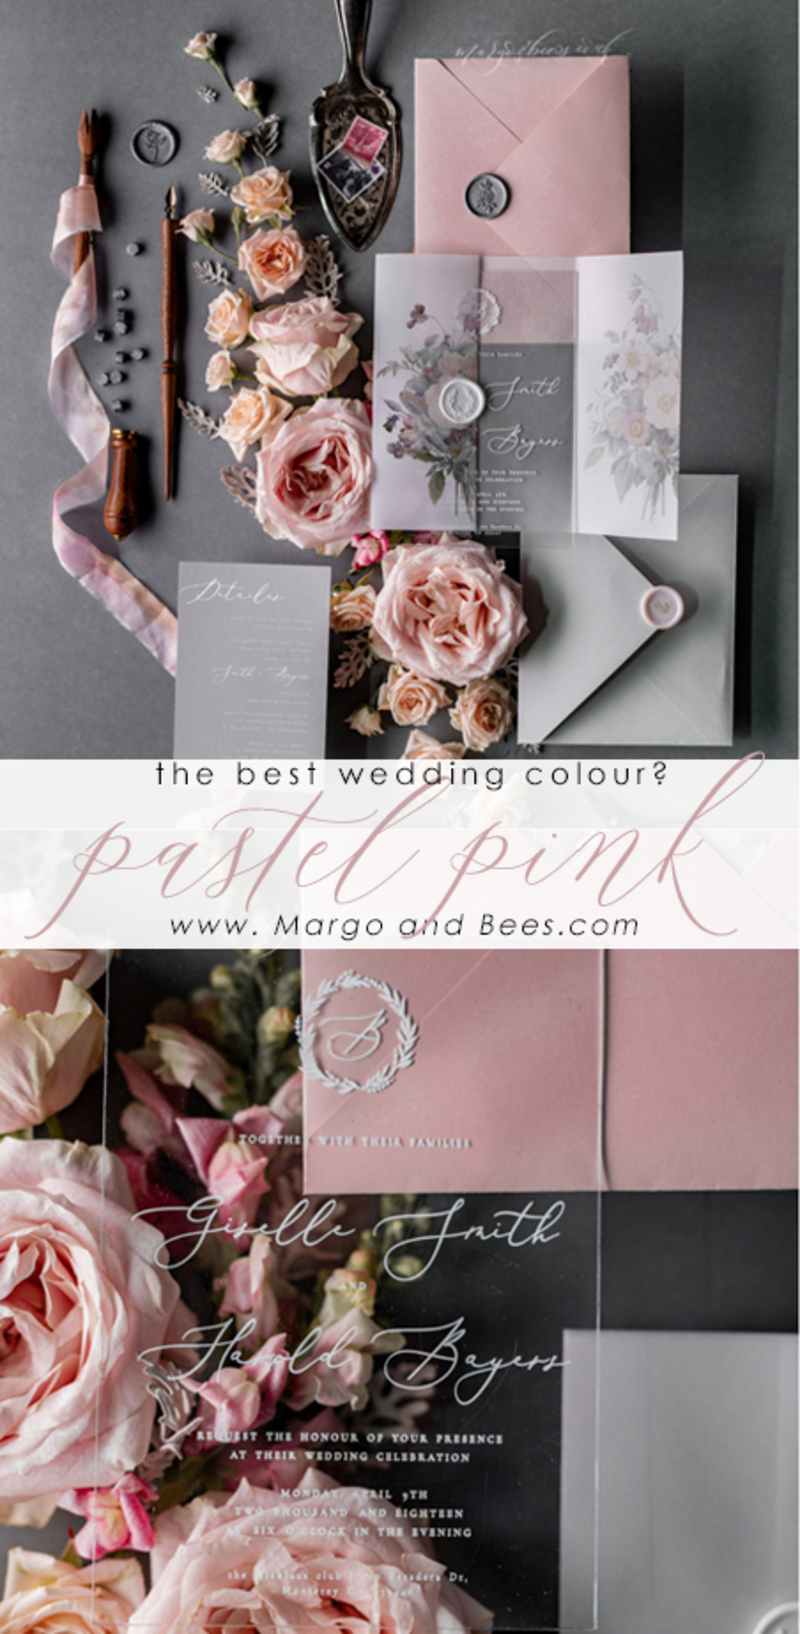 Blossom Personalized Wedding invitations Transparent Stationery with Vellum and Wax Seal -46